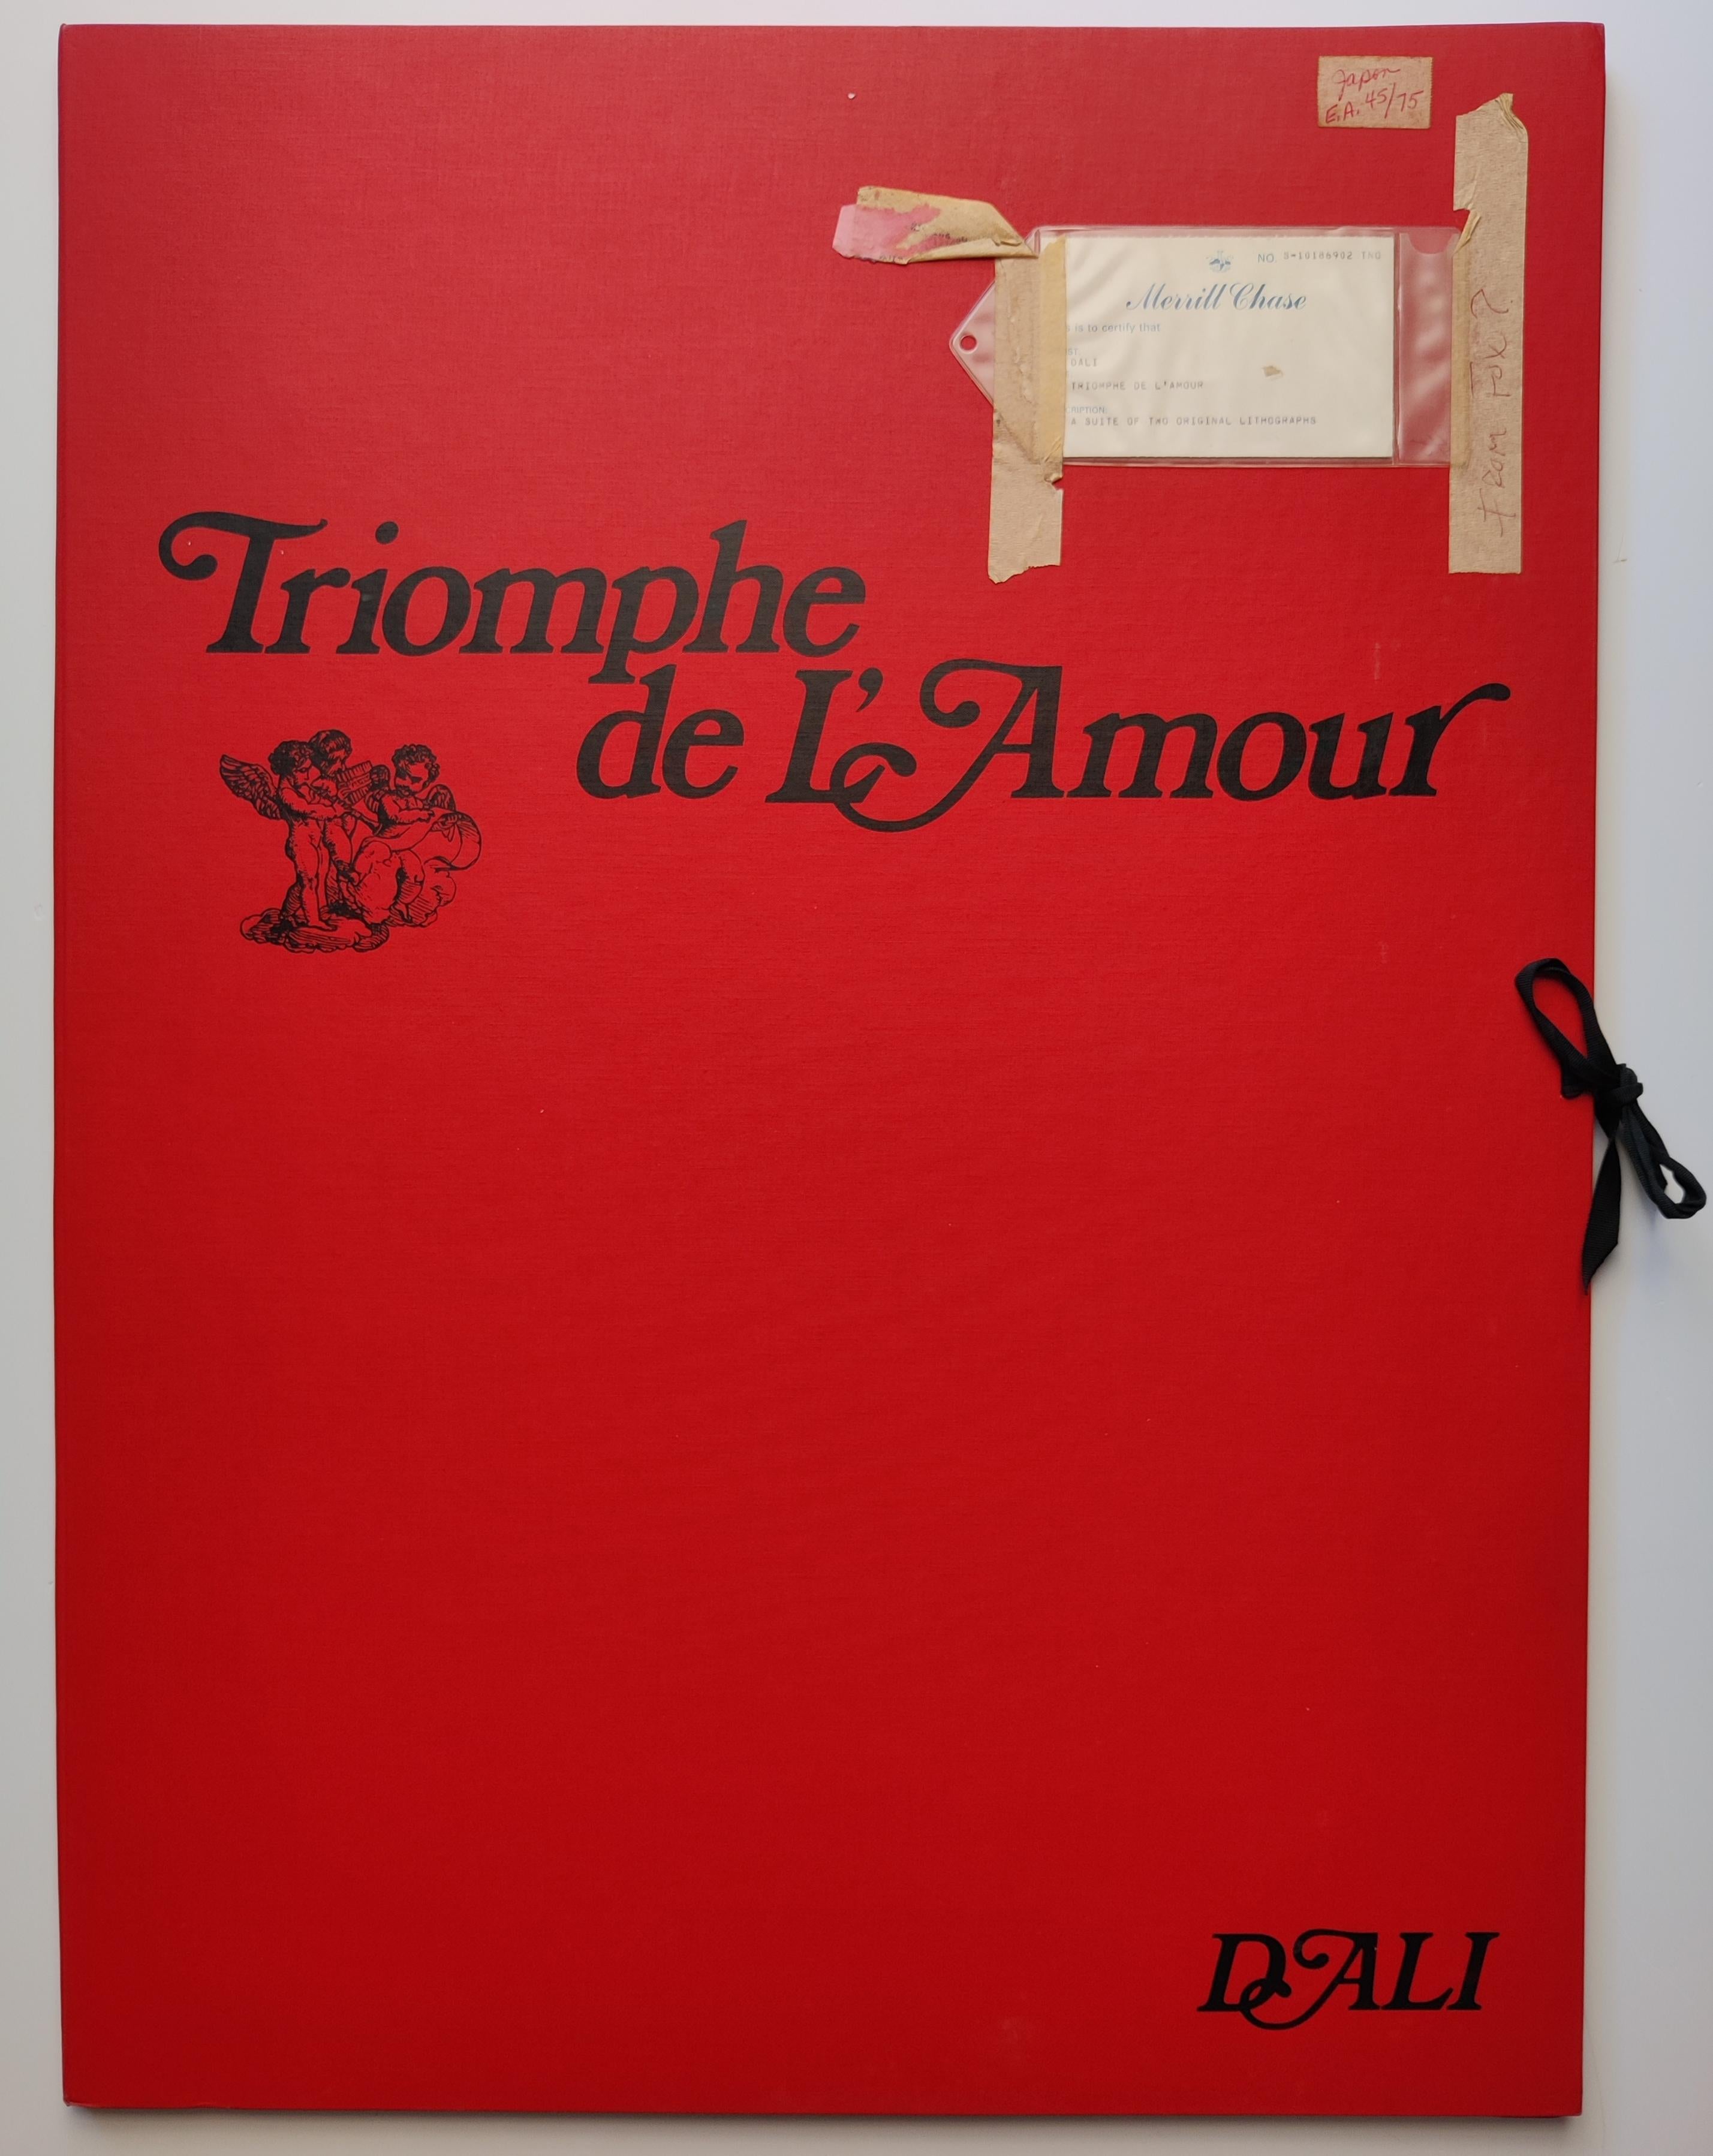 Salvador Dali 
Triomphe de L'Amour  (Triumph of Love), 1977
Suite of 2 cooperative lithographs
Each hand signed
Edition EA 45 / 75
These are on Japon paper and come with the original portfolio, including the 2 inside pages.
Sheet Size: 30